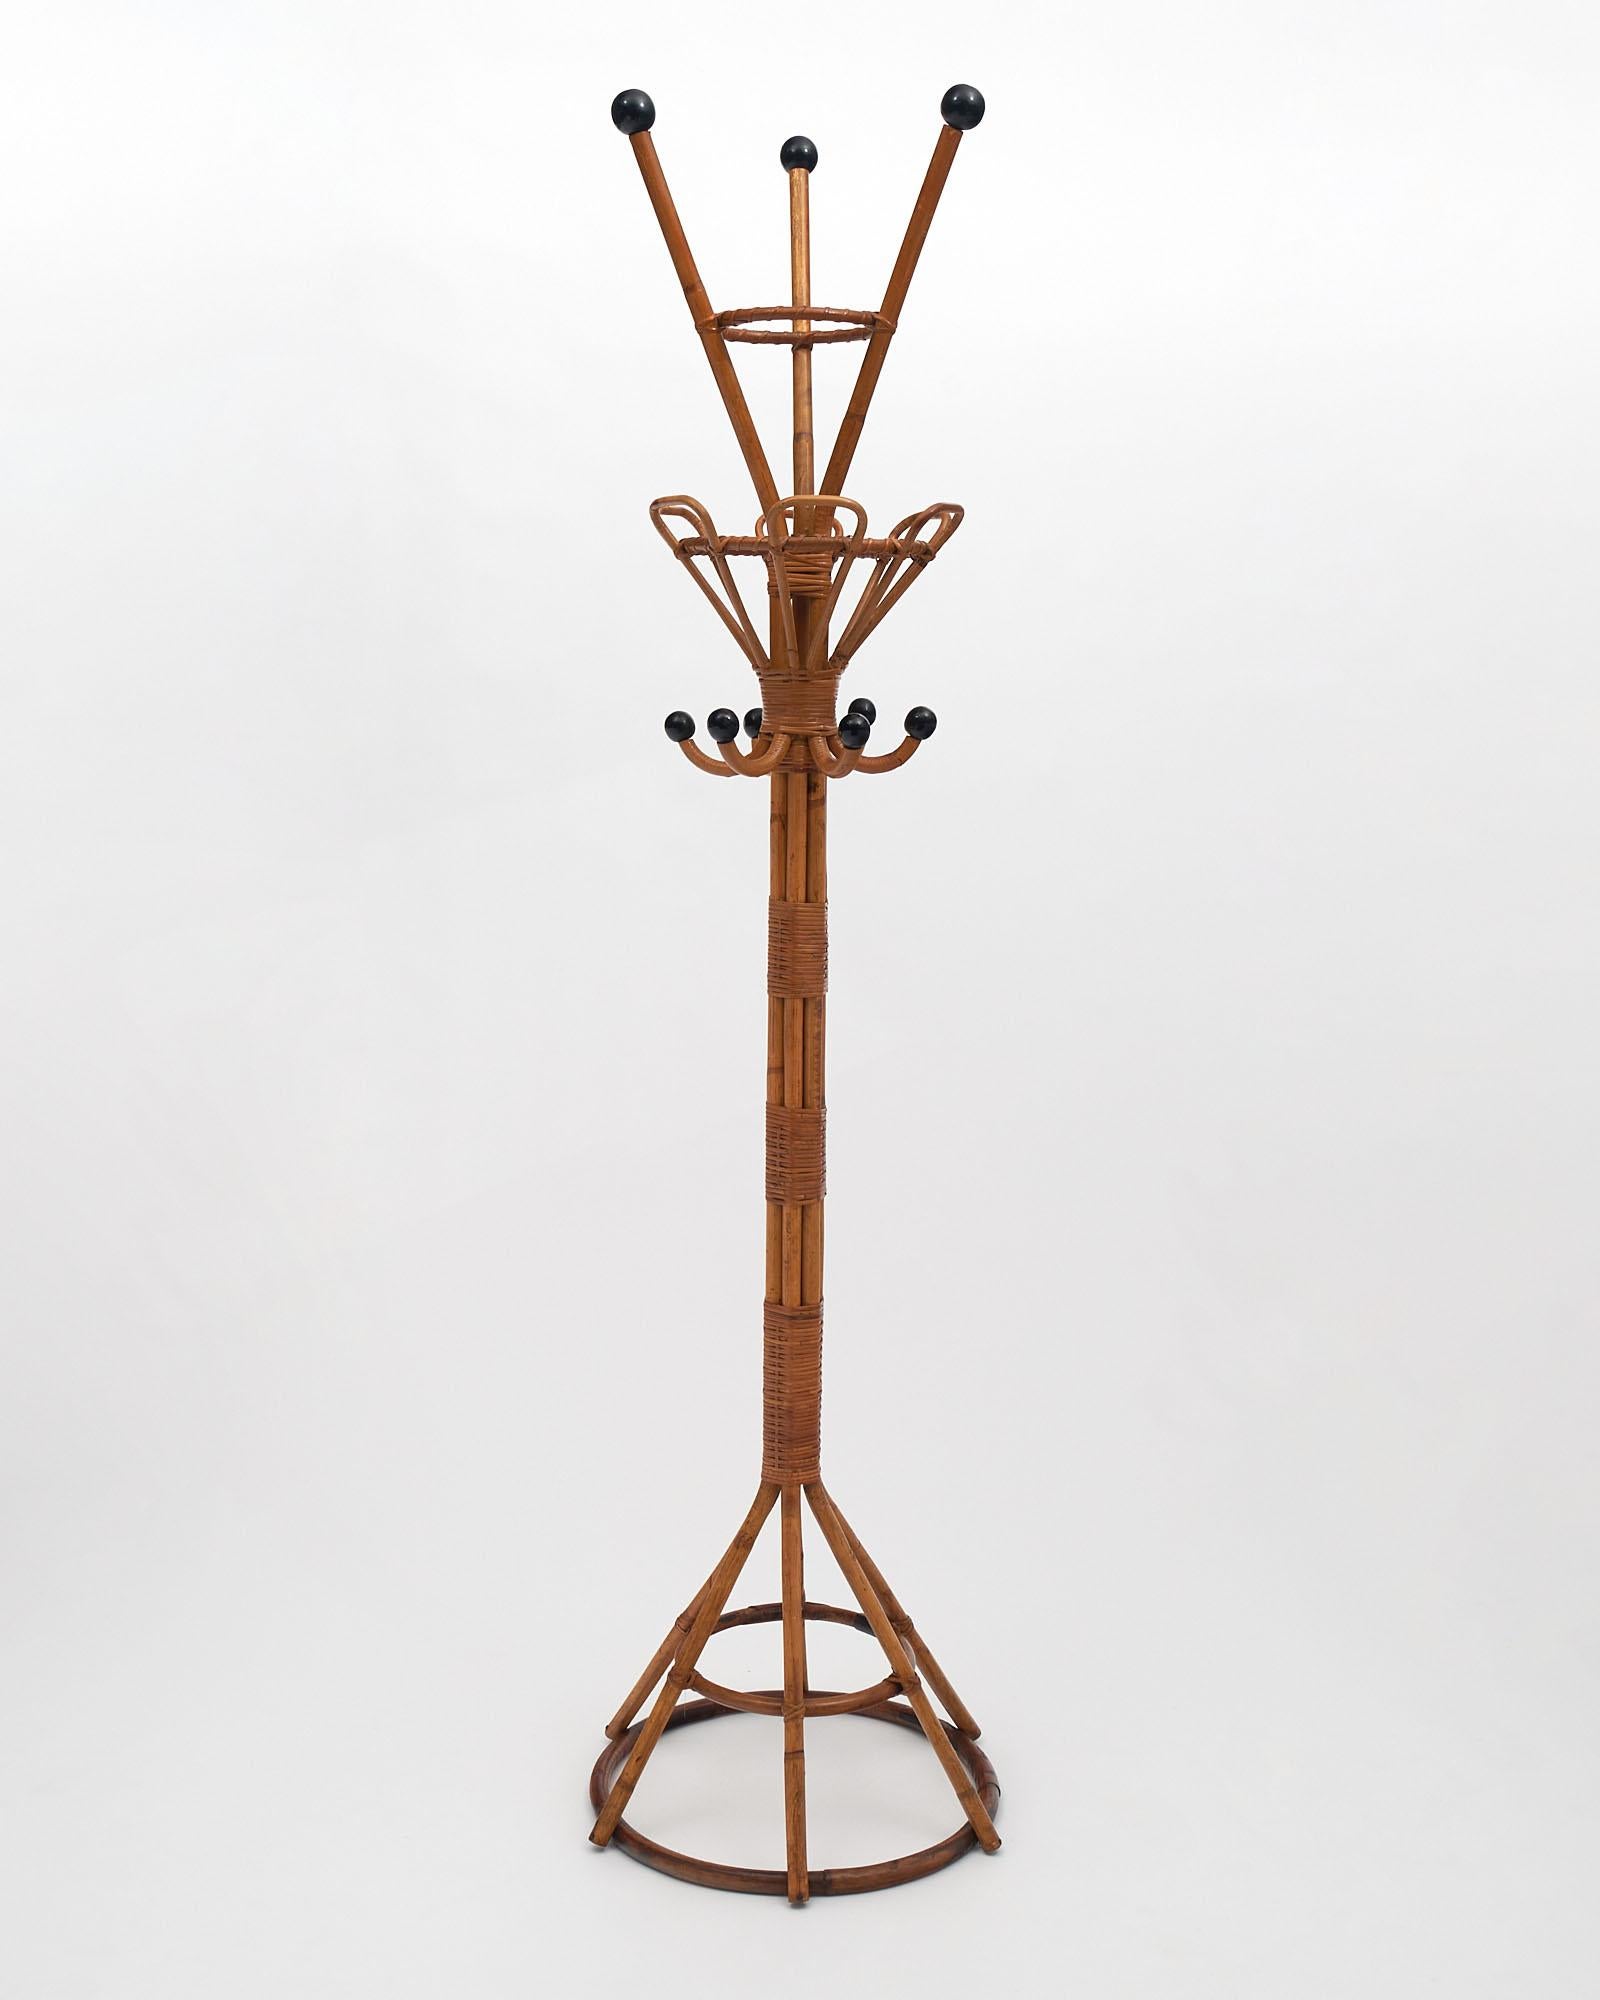 Coat hanger from France made of rattan. This piece, originally from a French Riviera villa, has great height and form.